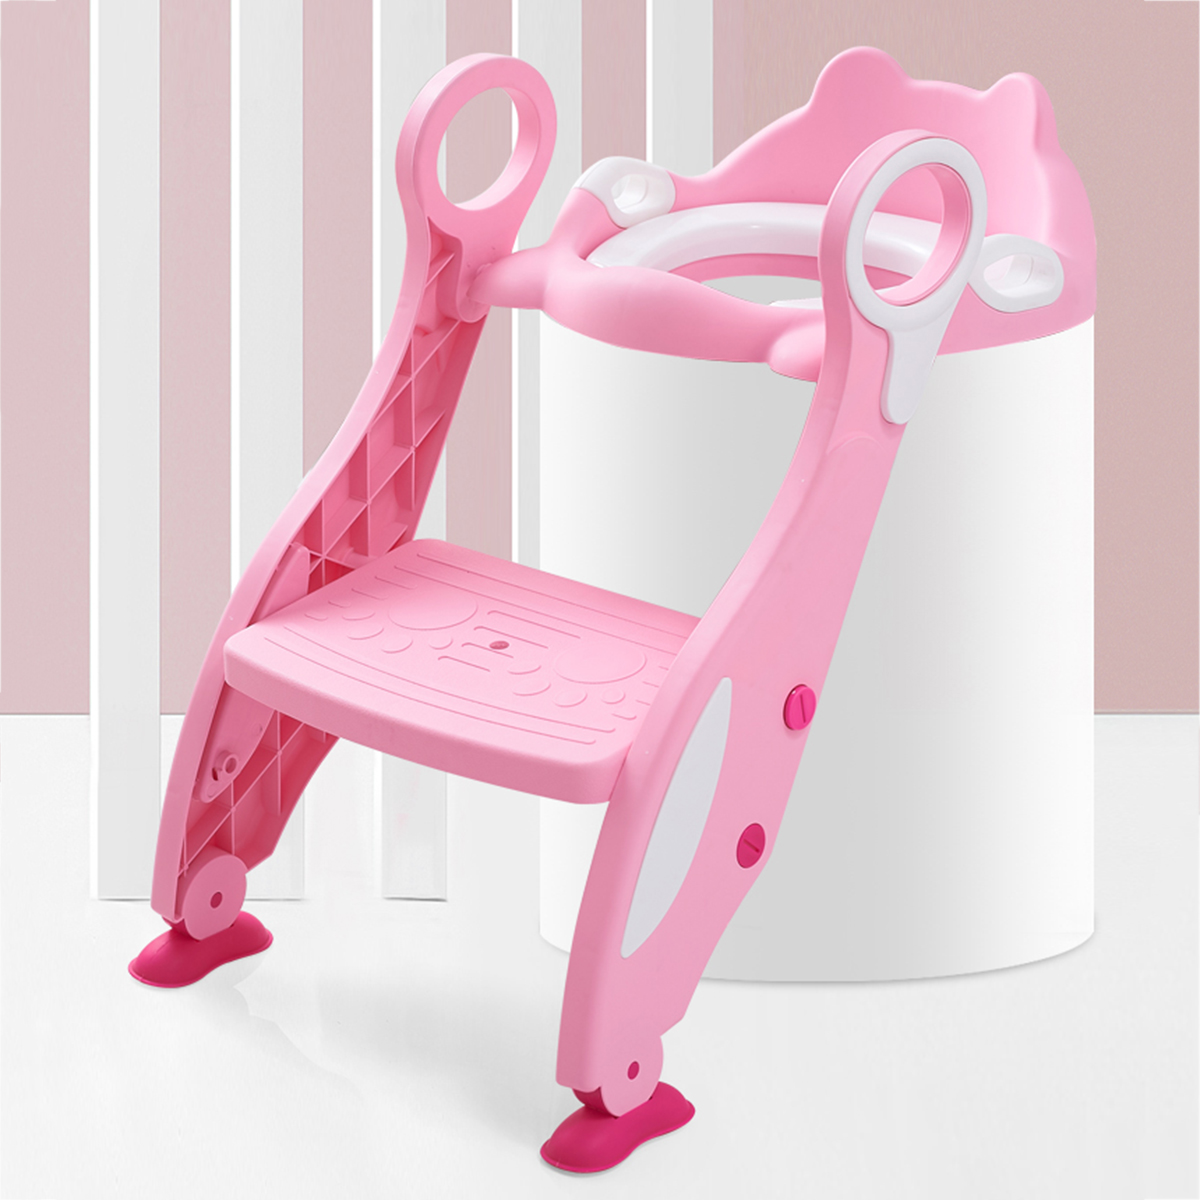 Baby-Toddler-Toilet-Trainer-Potty-with-Adjustable-Ladder-Safety-Seat-Chair-Step-1776033-8